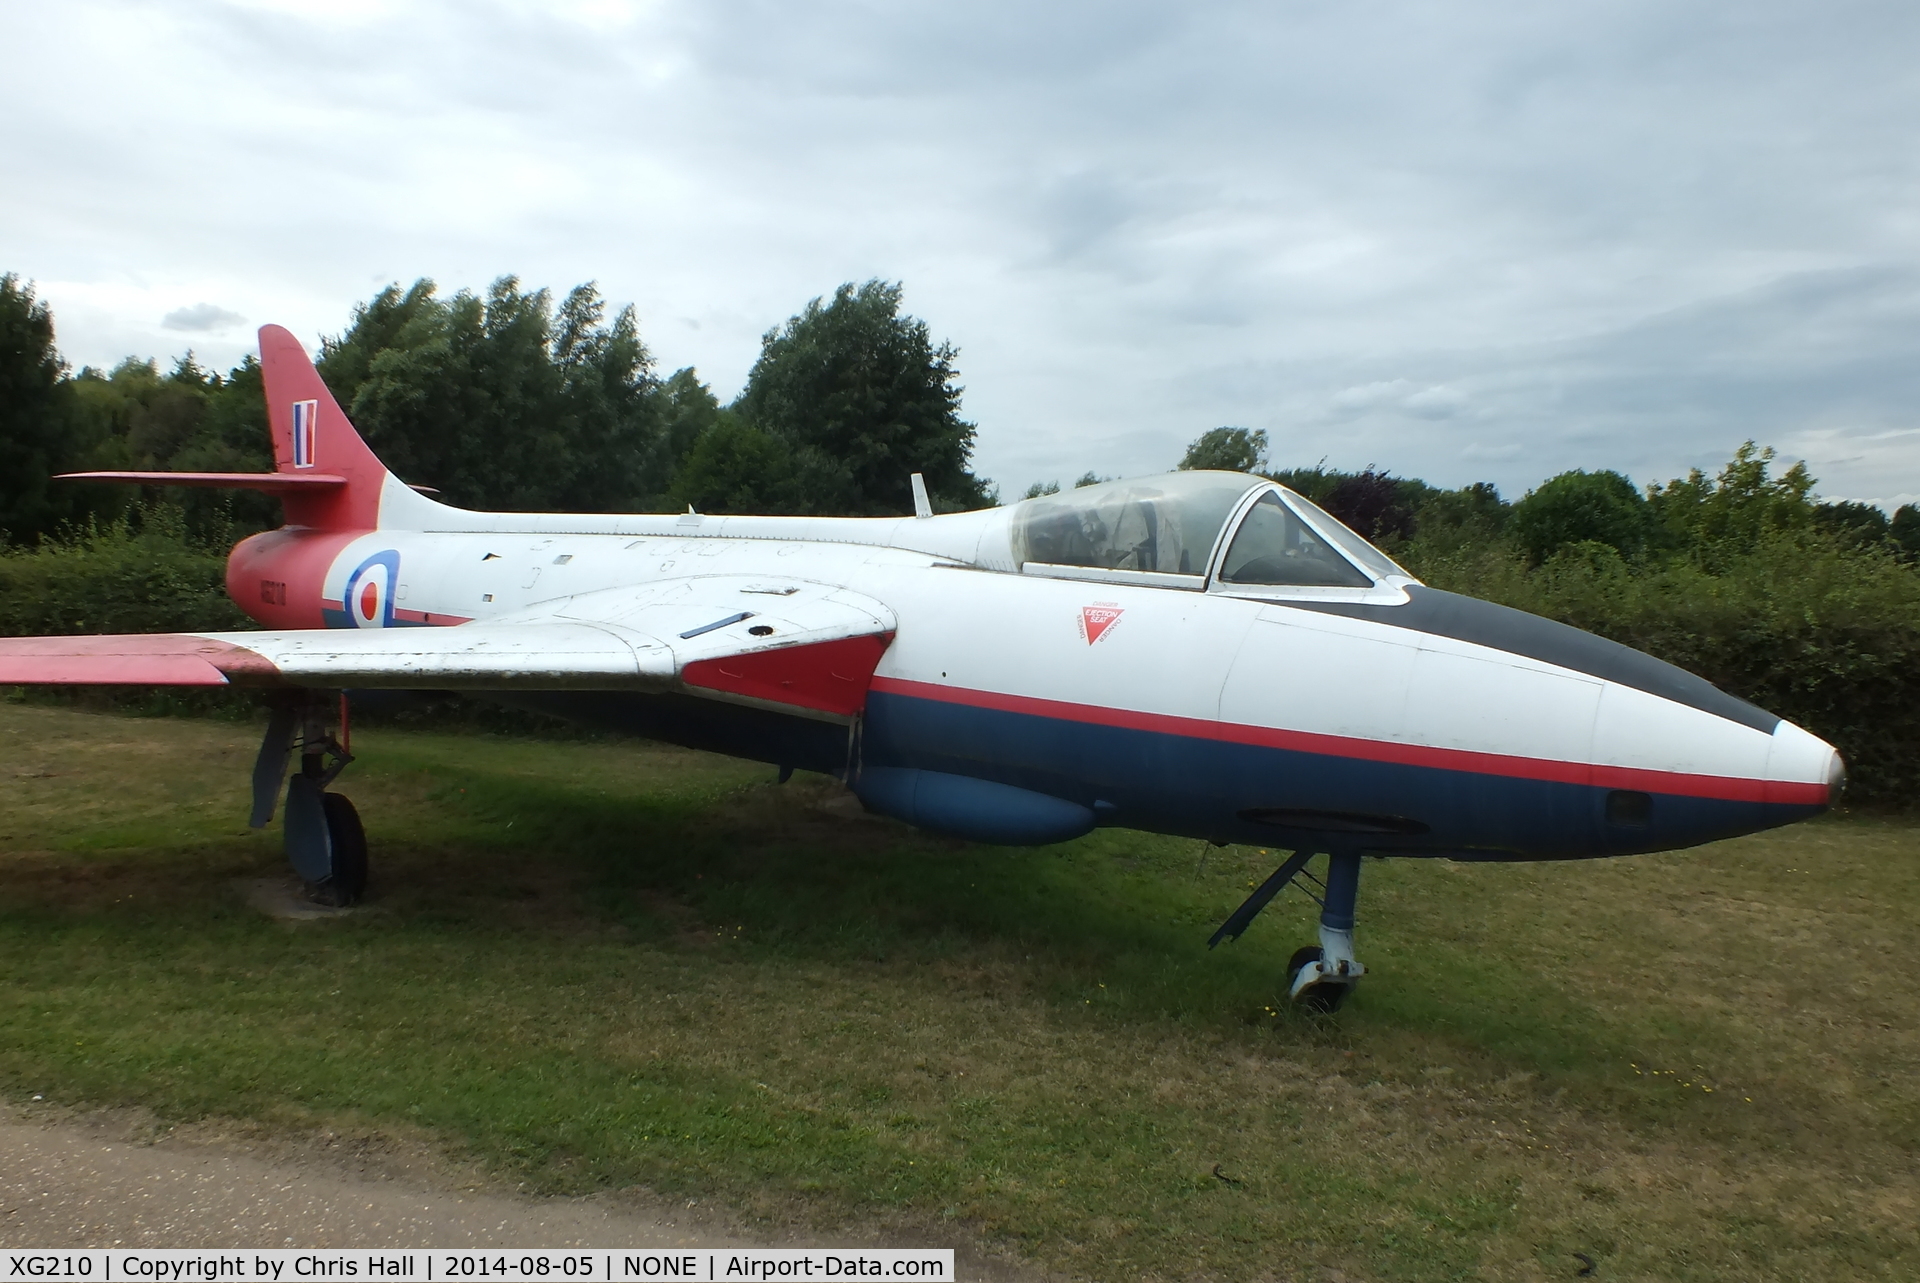 XG210, Hawker Hunter F.6 C/N 41H-680035, Composite Hunter made from the fuselage of XG210 and wings from XL572 and XL623, located at Beck Row, Suffolk